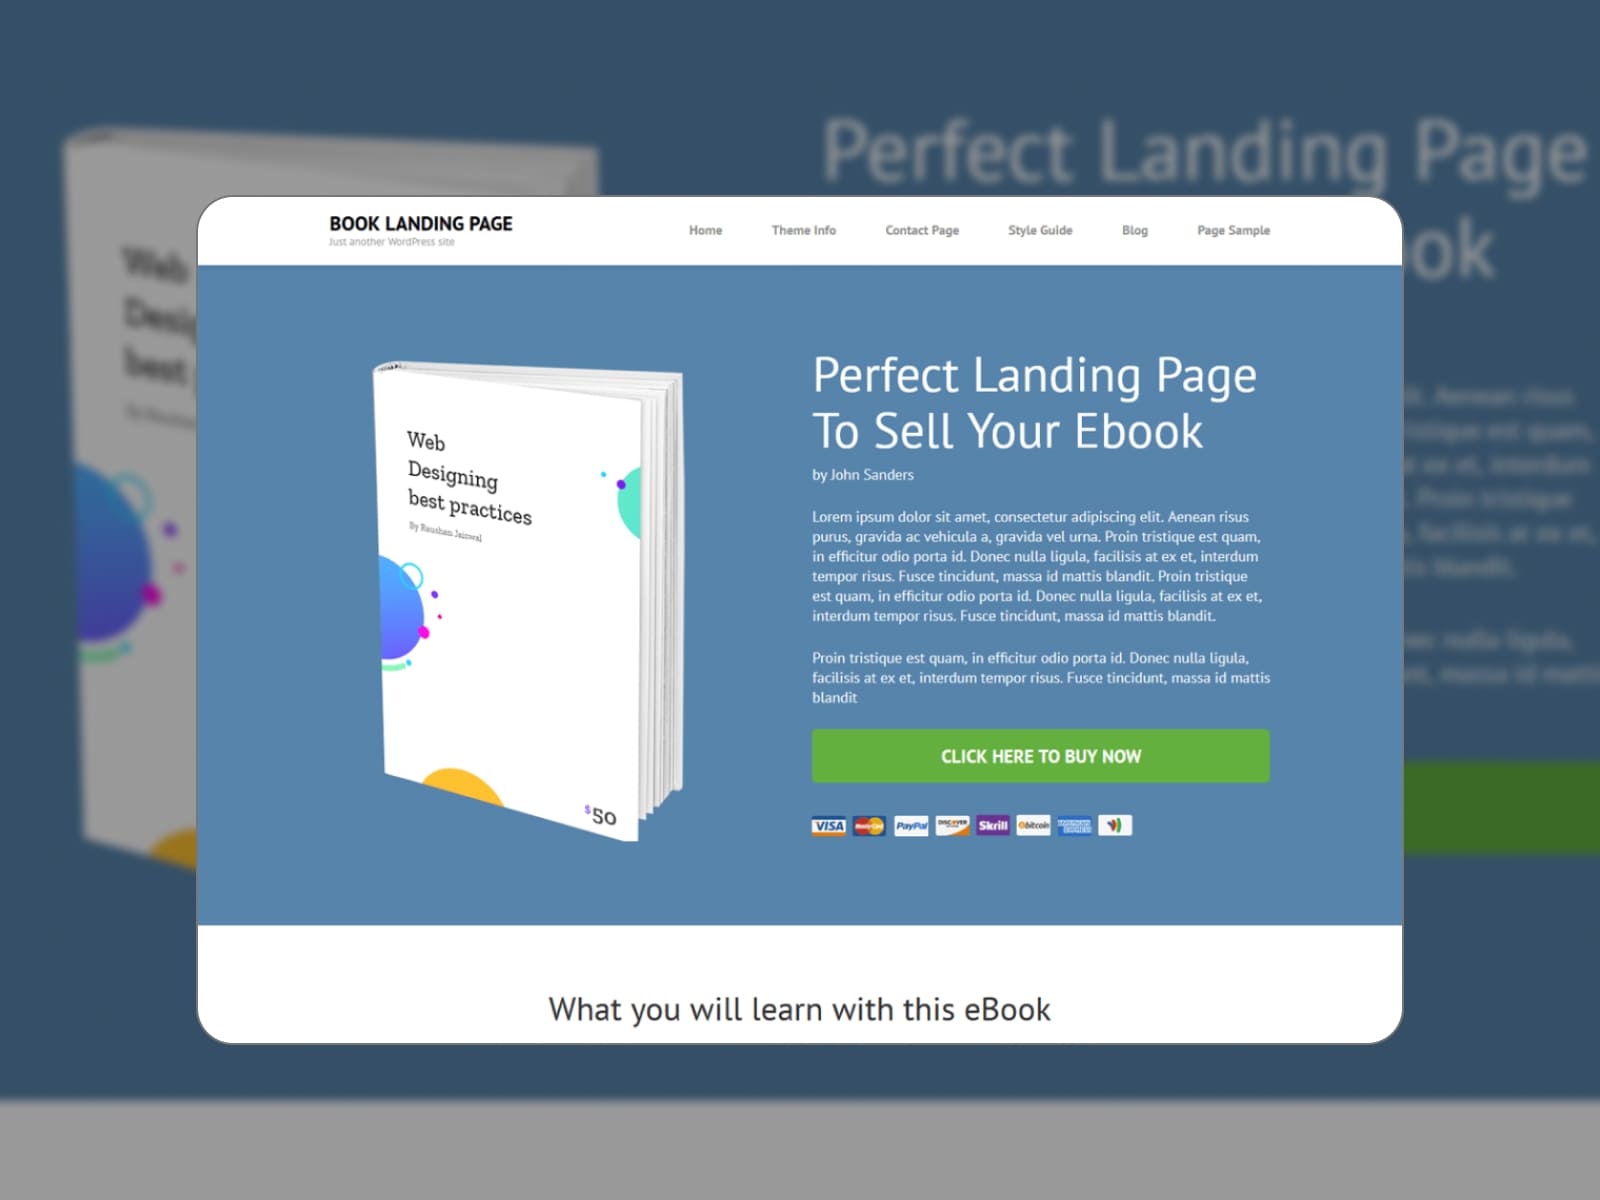 Book Landing Page WordPress theme demo website in blue and white colors.